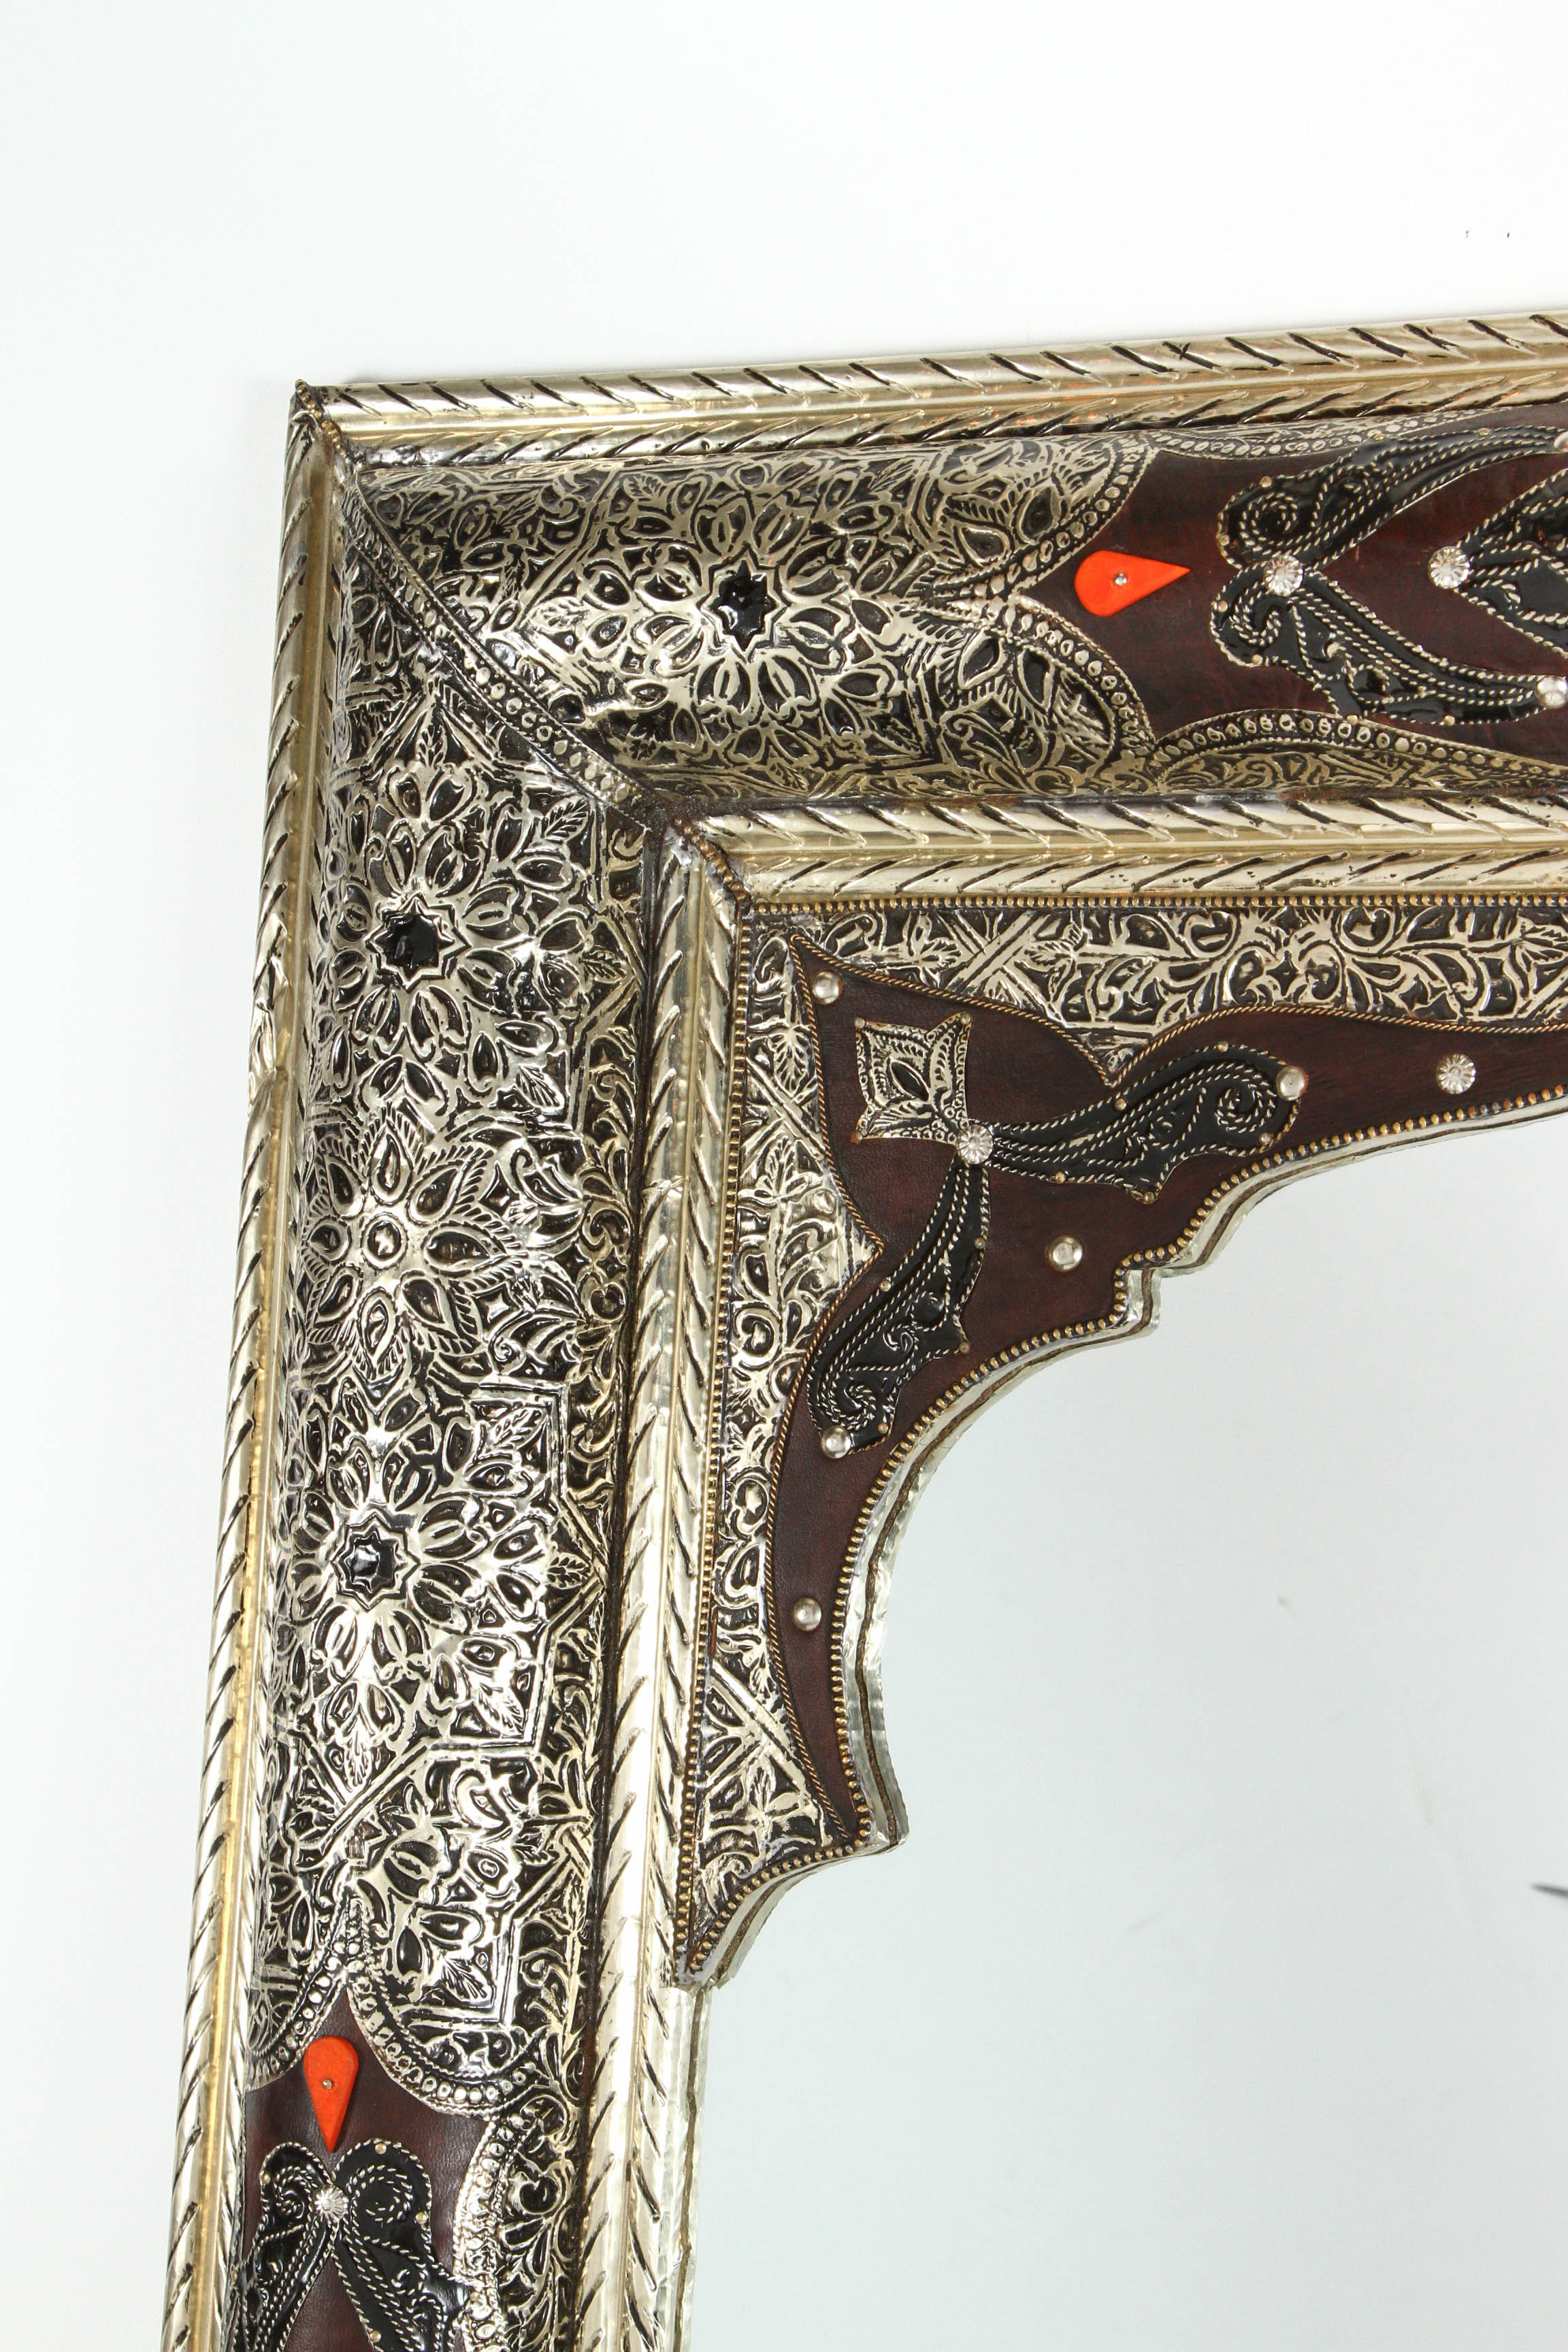 Pair of Elegant Moroccan mirrors decorated with silvered repousse metal delicately engraved and wrapped with leather and amber color stones.
The inside mirror has a Moorish arch in leather and Fine filigree silver décor.
Handcrafted rectangular